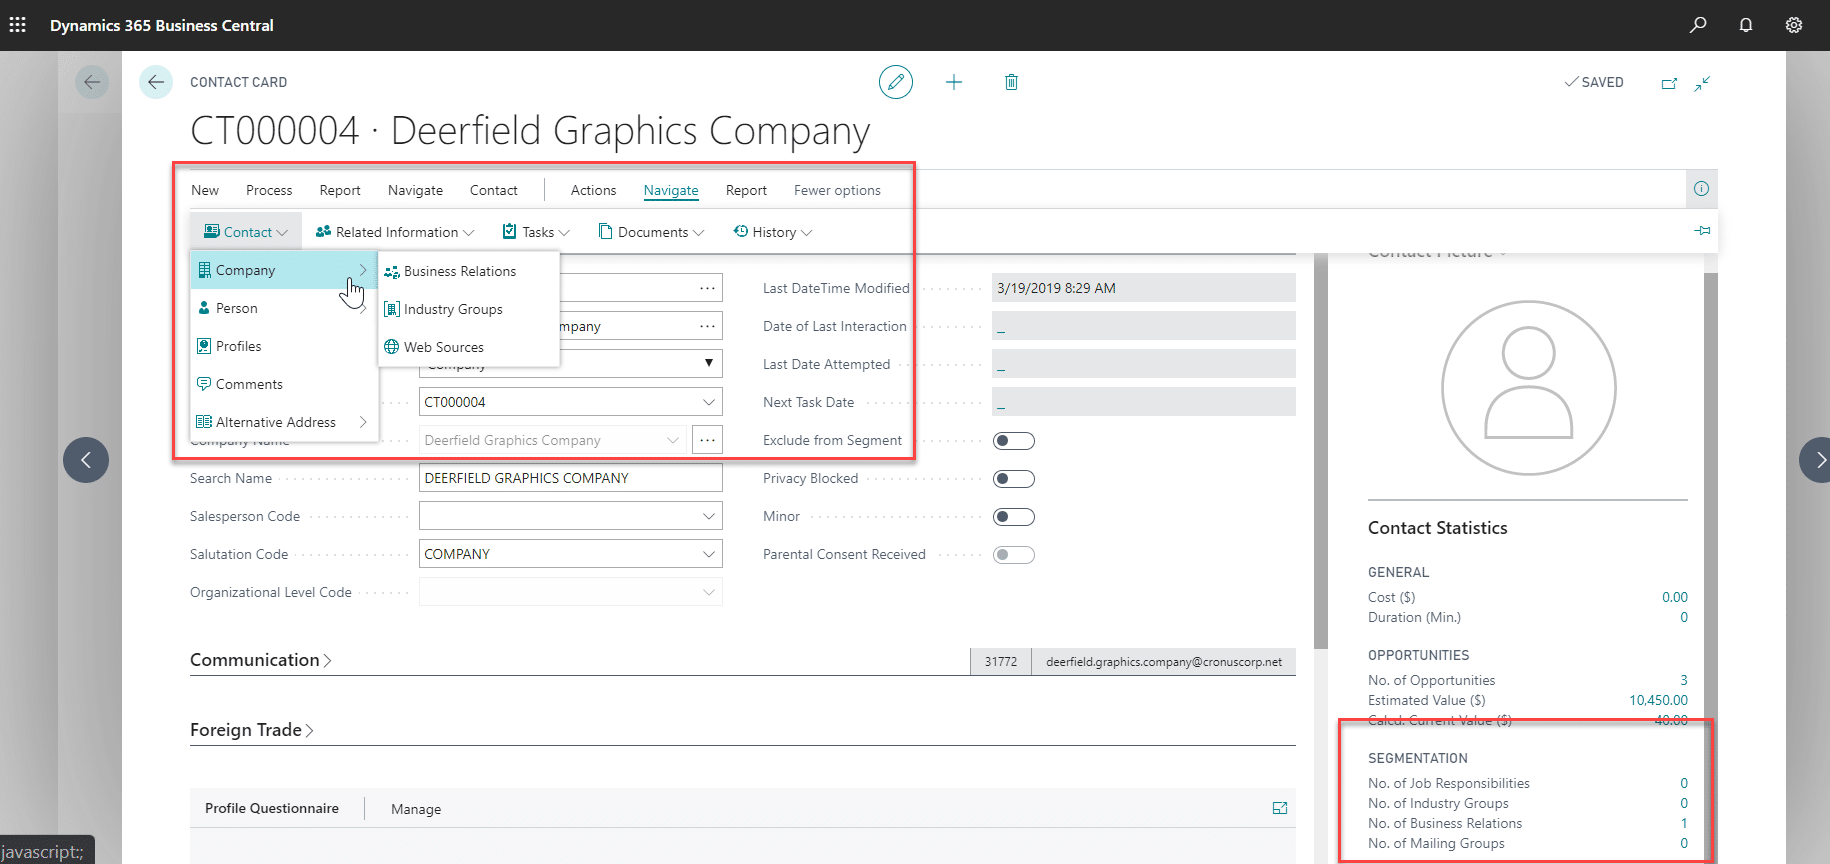 Dynamics 365 business central contact management part 2: contact cards